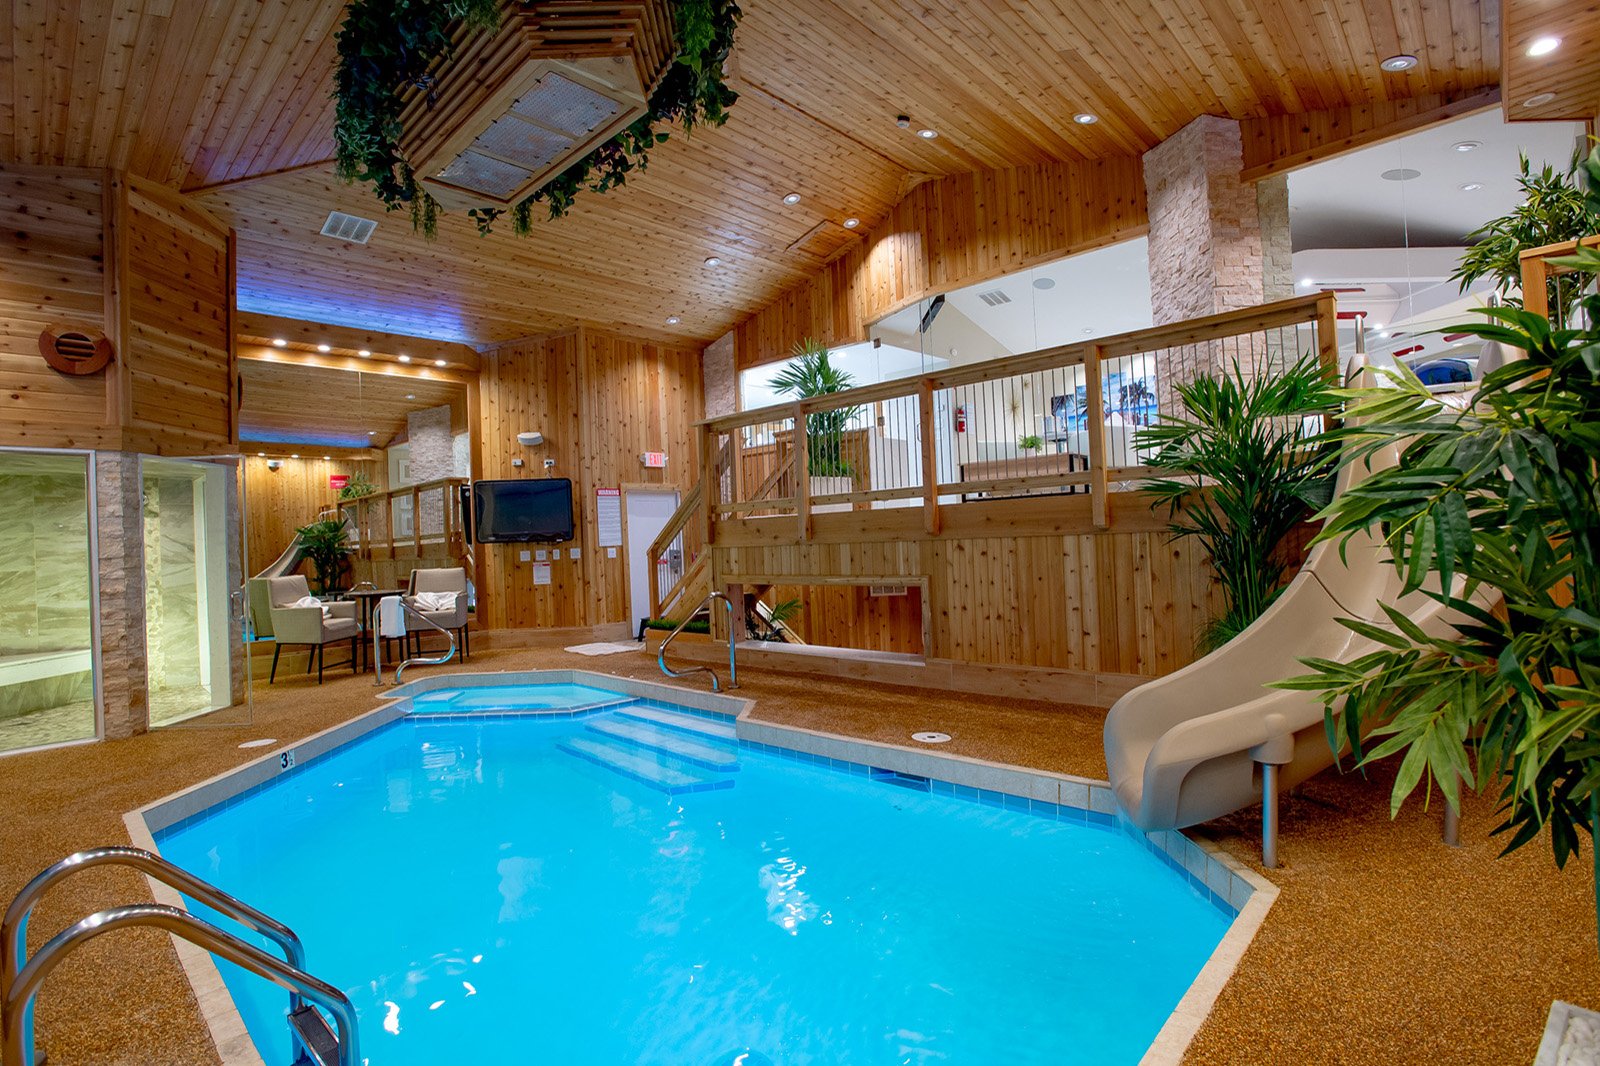 CHALET SWIMMING POOL SUITE - Learn more...